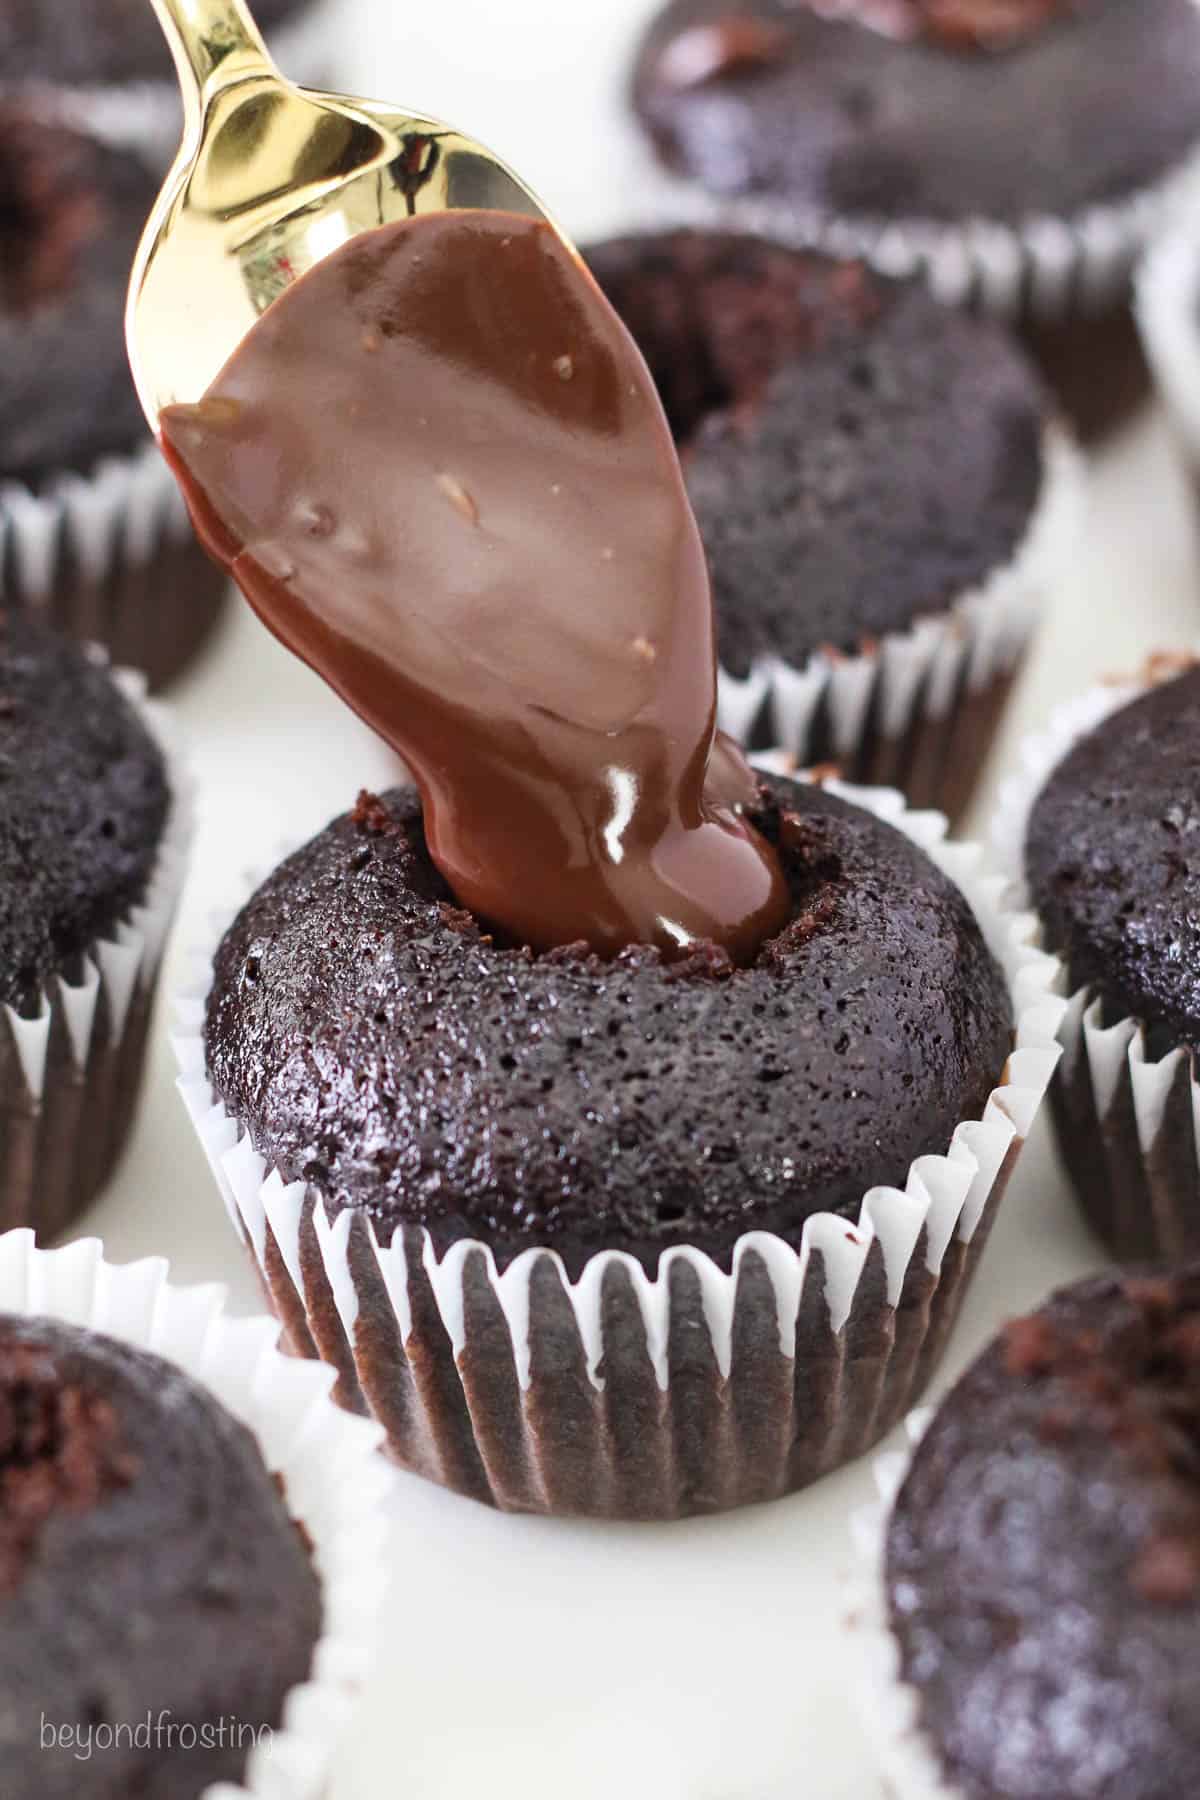 Chocolate ganache is spooned into a hole cut into the center of a chocolate cupcake.